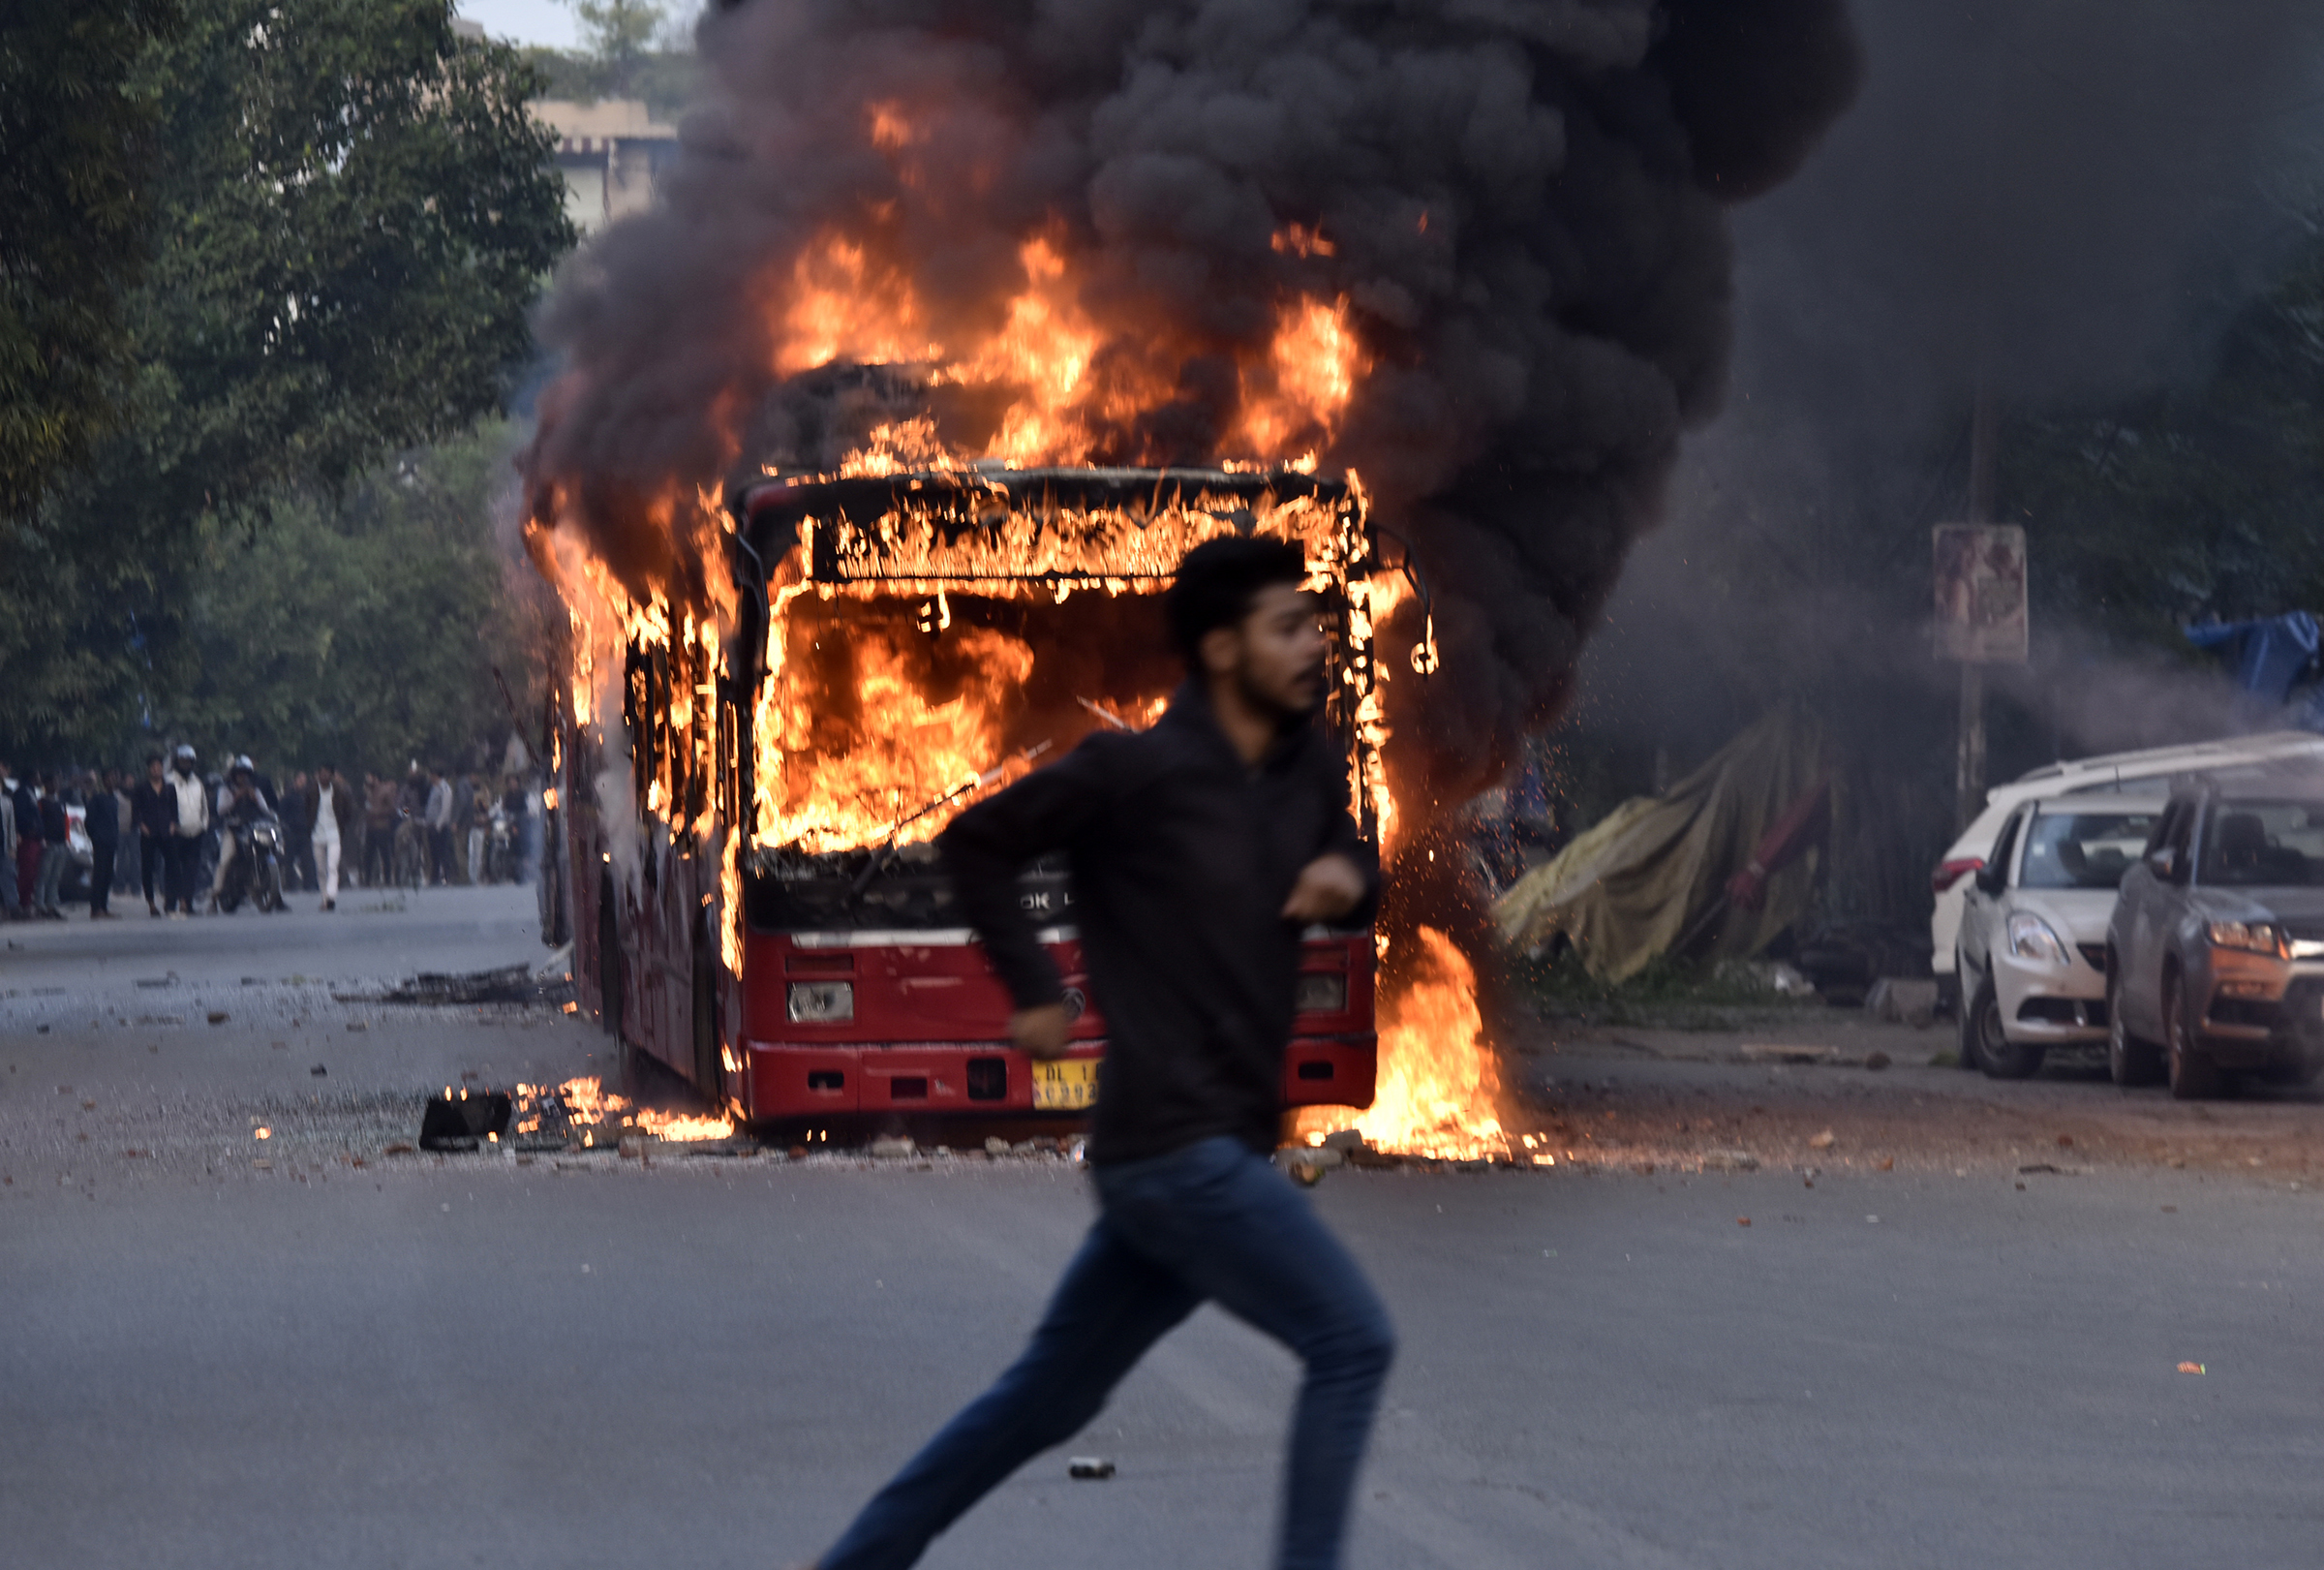 A burning bus is seen after it was set on fire by demonstrators during a protest against the Citizenship amendment Act (CAA) at New Friends Colony in New Delhi, India on Dec. 15, 2019. (Sanjeev Verma—Hindustan Times via Getty Images)